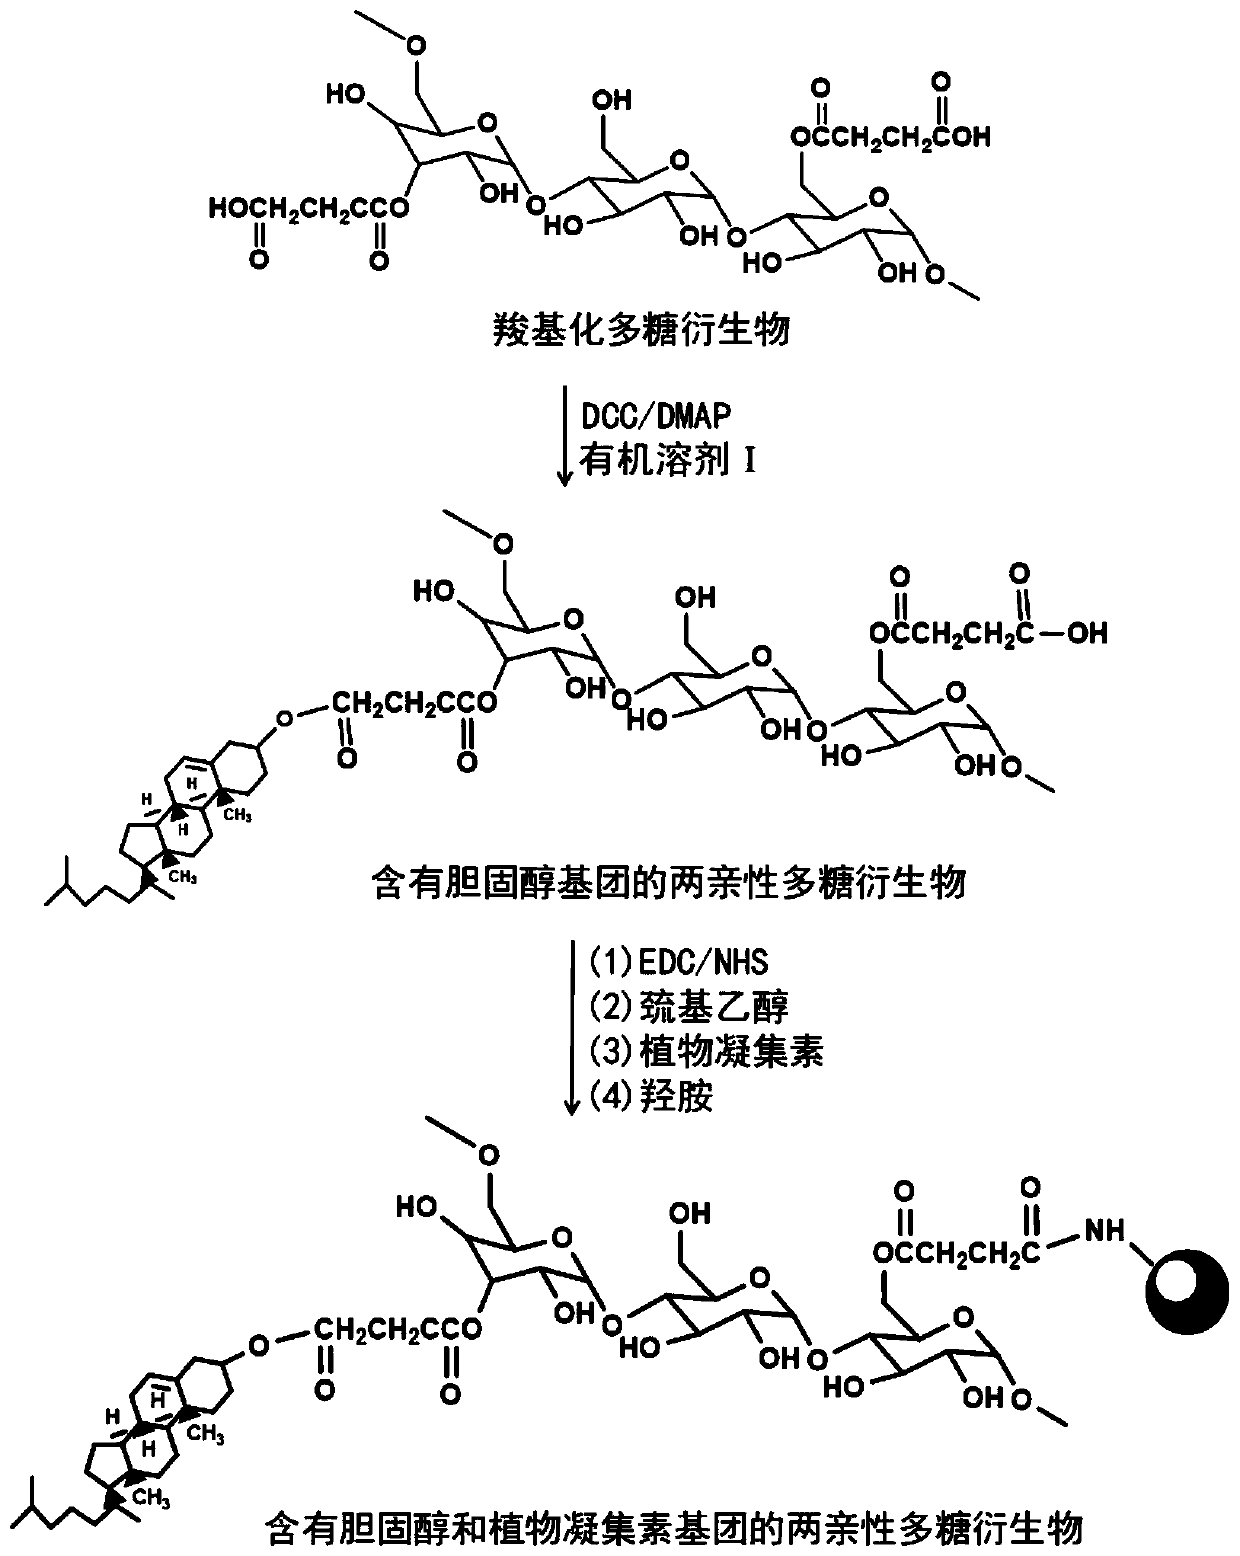 Amphiphilic polysaccharide derivative containing cholesterol and phytolectin group as well as preparation method and application of amphiphilic polysaccharide derivative